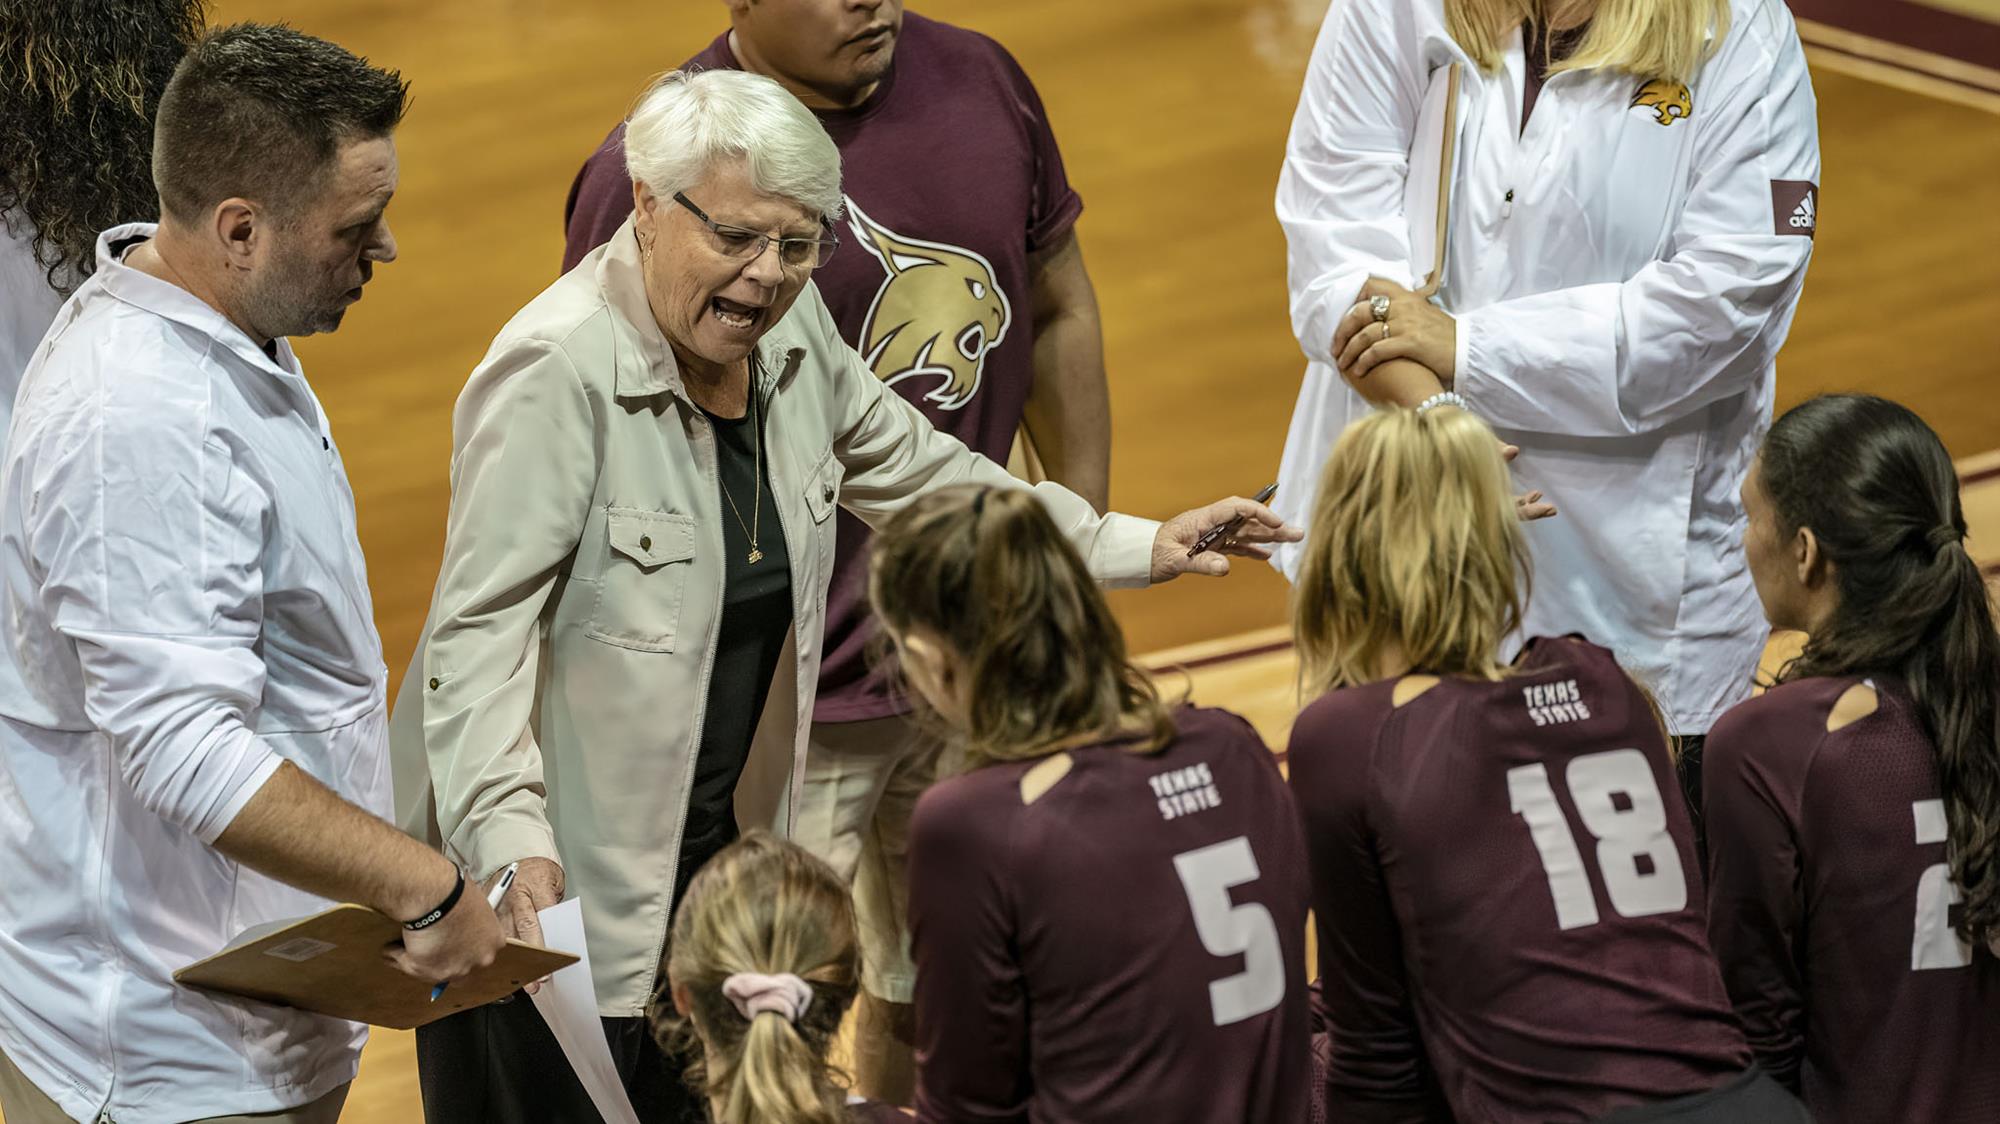 Karen Chisum and her assistant coaches stand in front of four Bobcat volleyball players in maroon jerseys with white lettering and numbers on the sideline in a match at Strahan Arena.